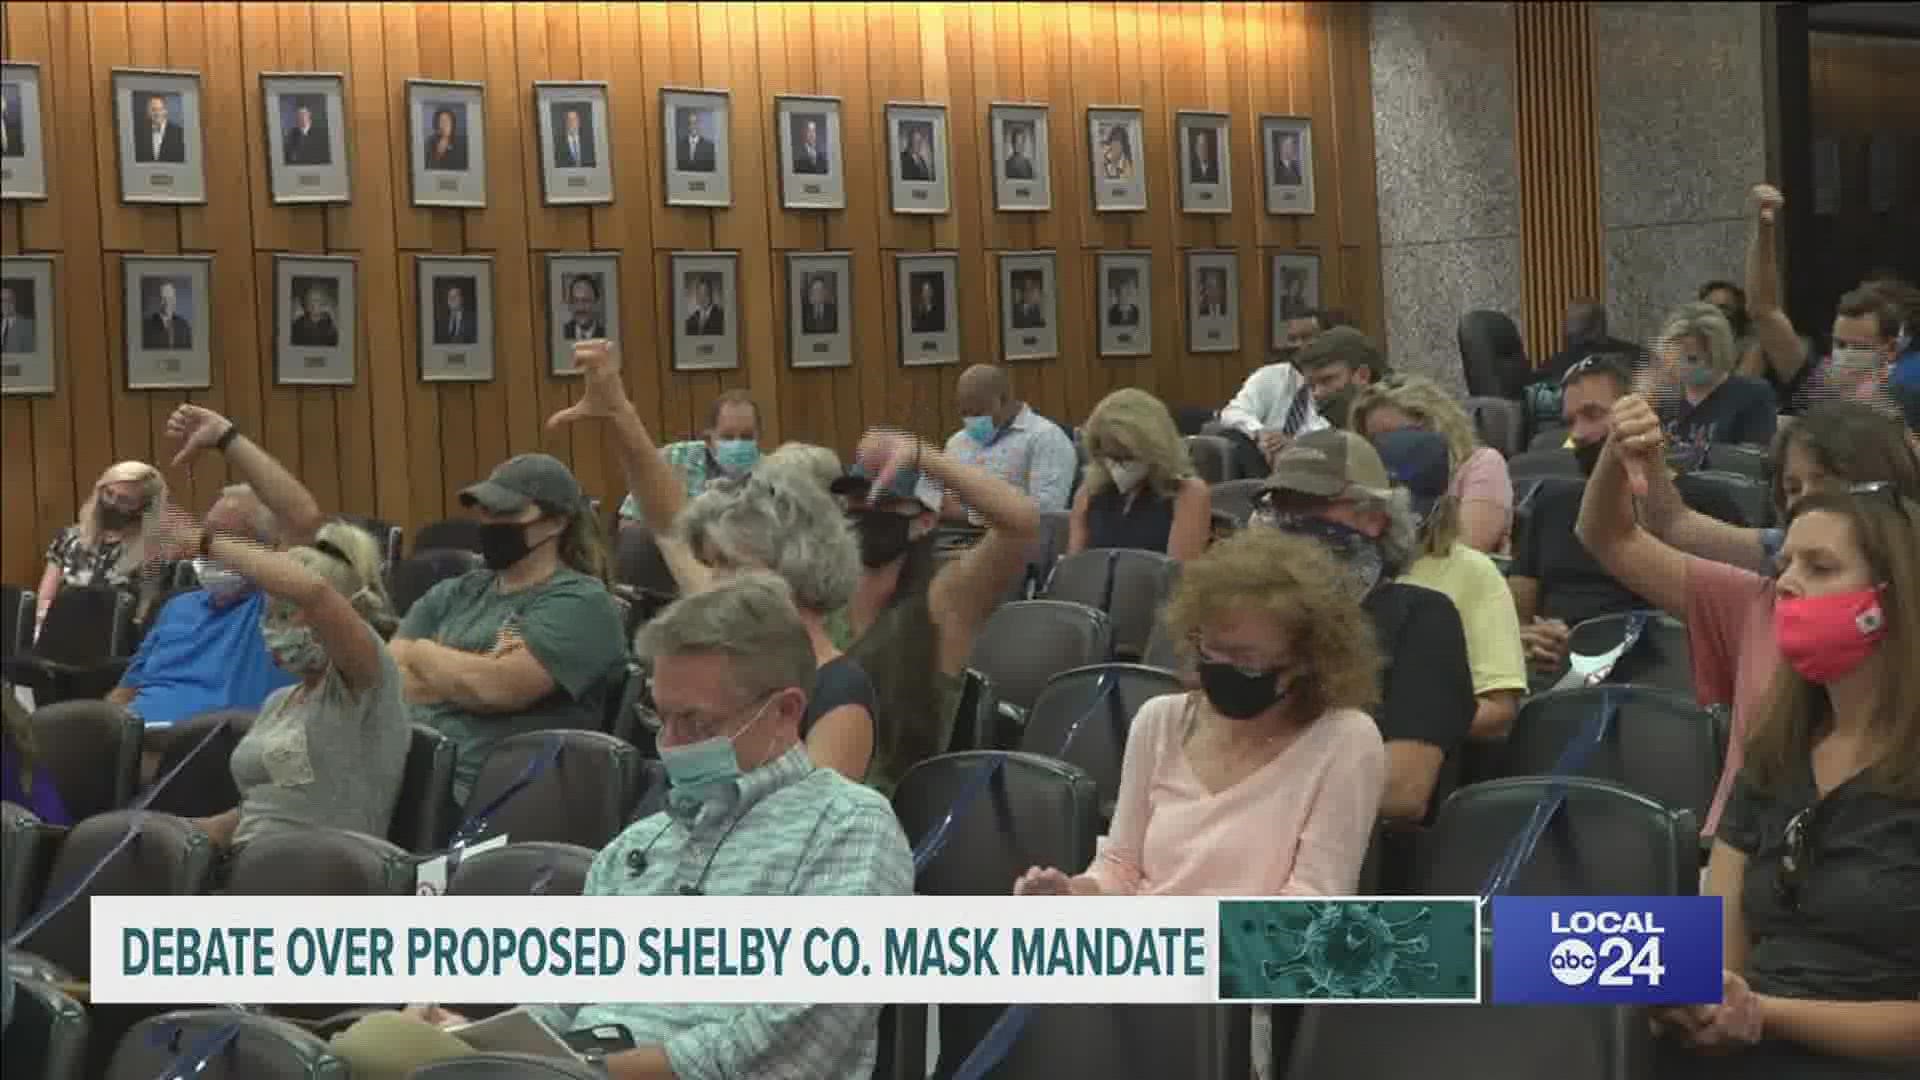 Reinstating a mask mandate is being discussed due to low vaccinations and a high case count in Shelby County.